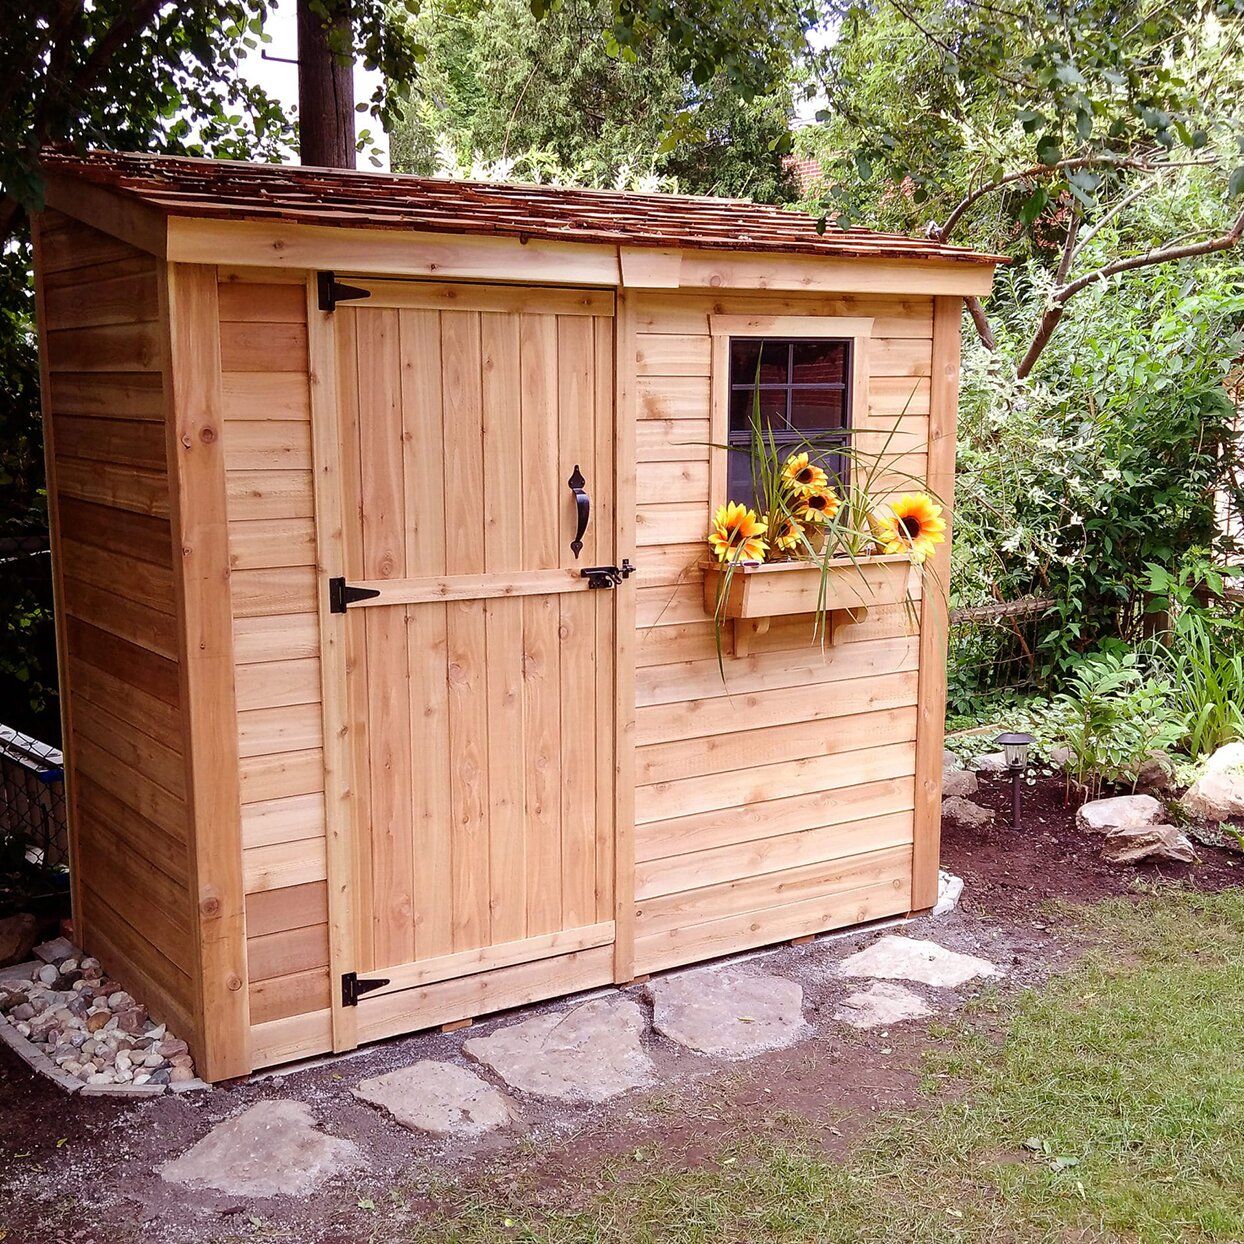 The Versatile Appeal of Garden Shed Kits